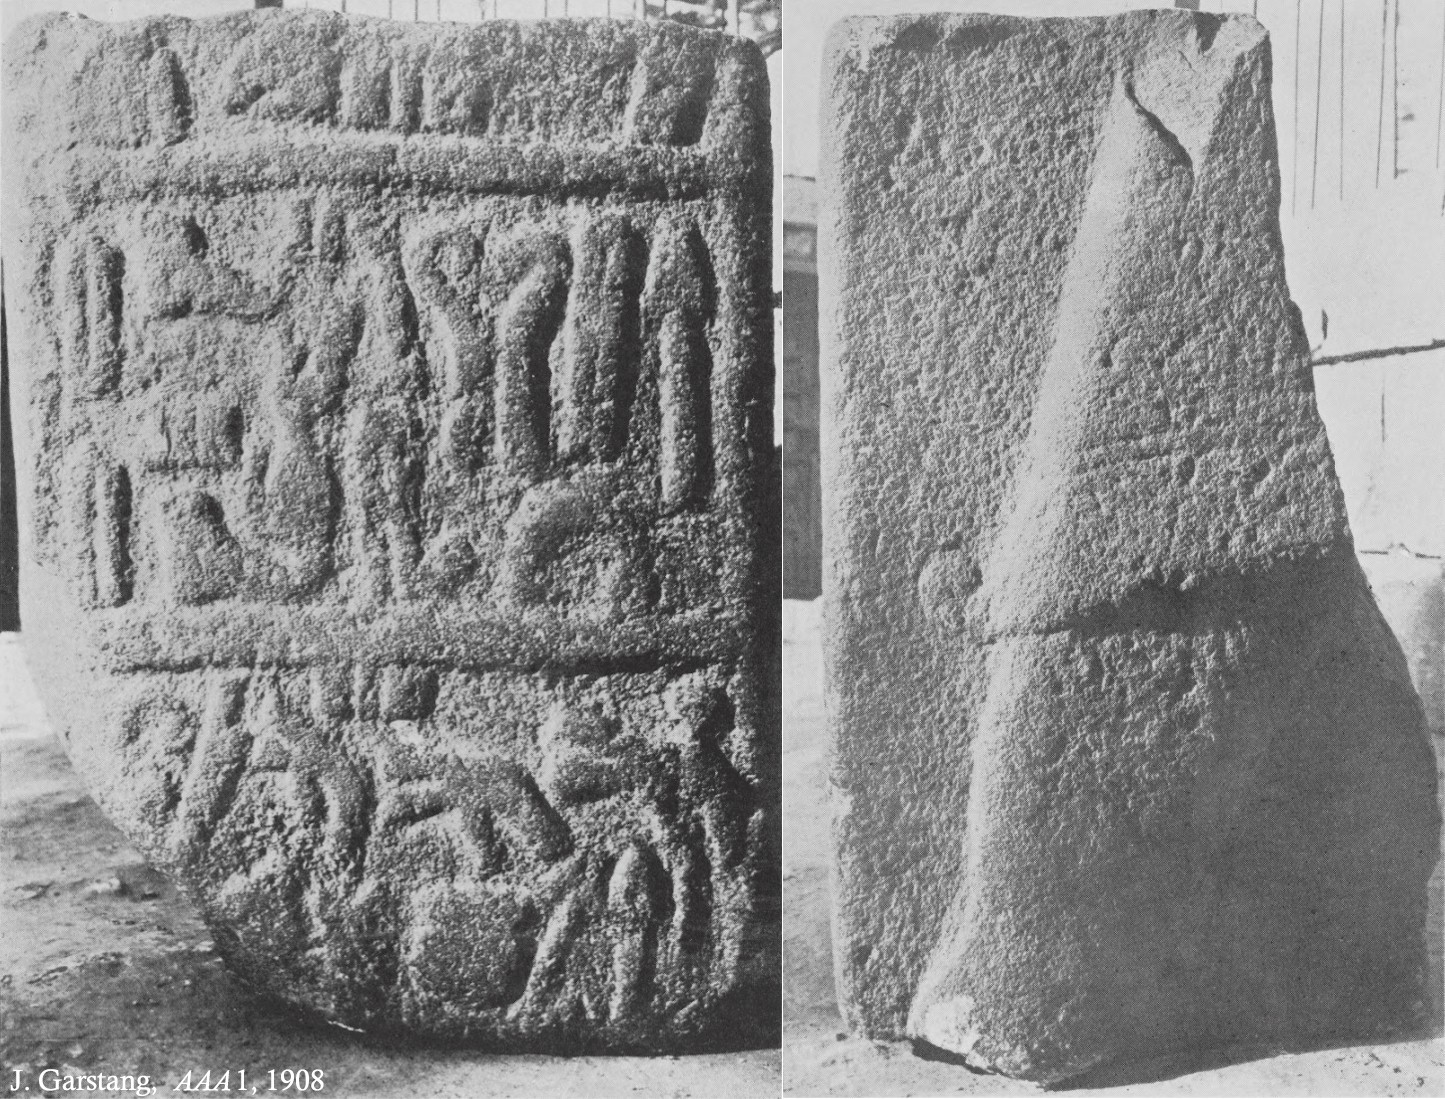 The inscription and the relief - J. Garstand in 1908